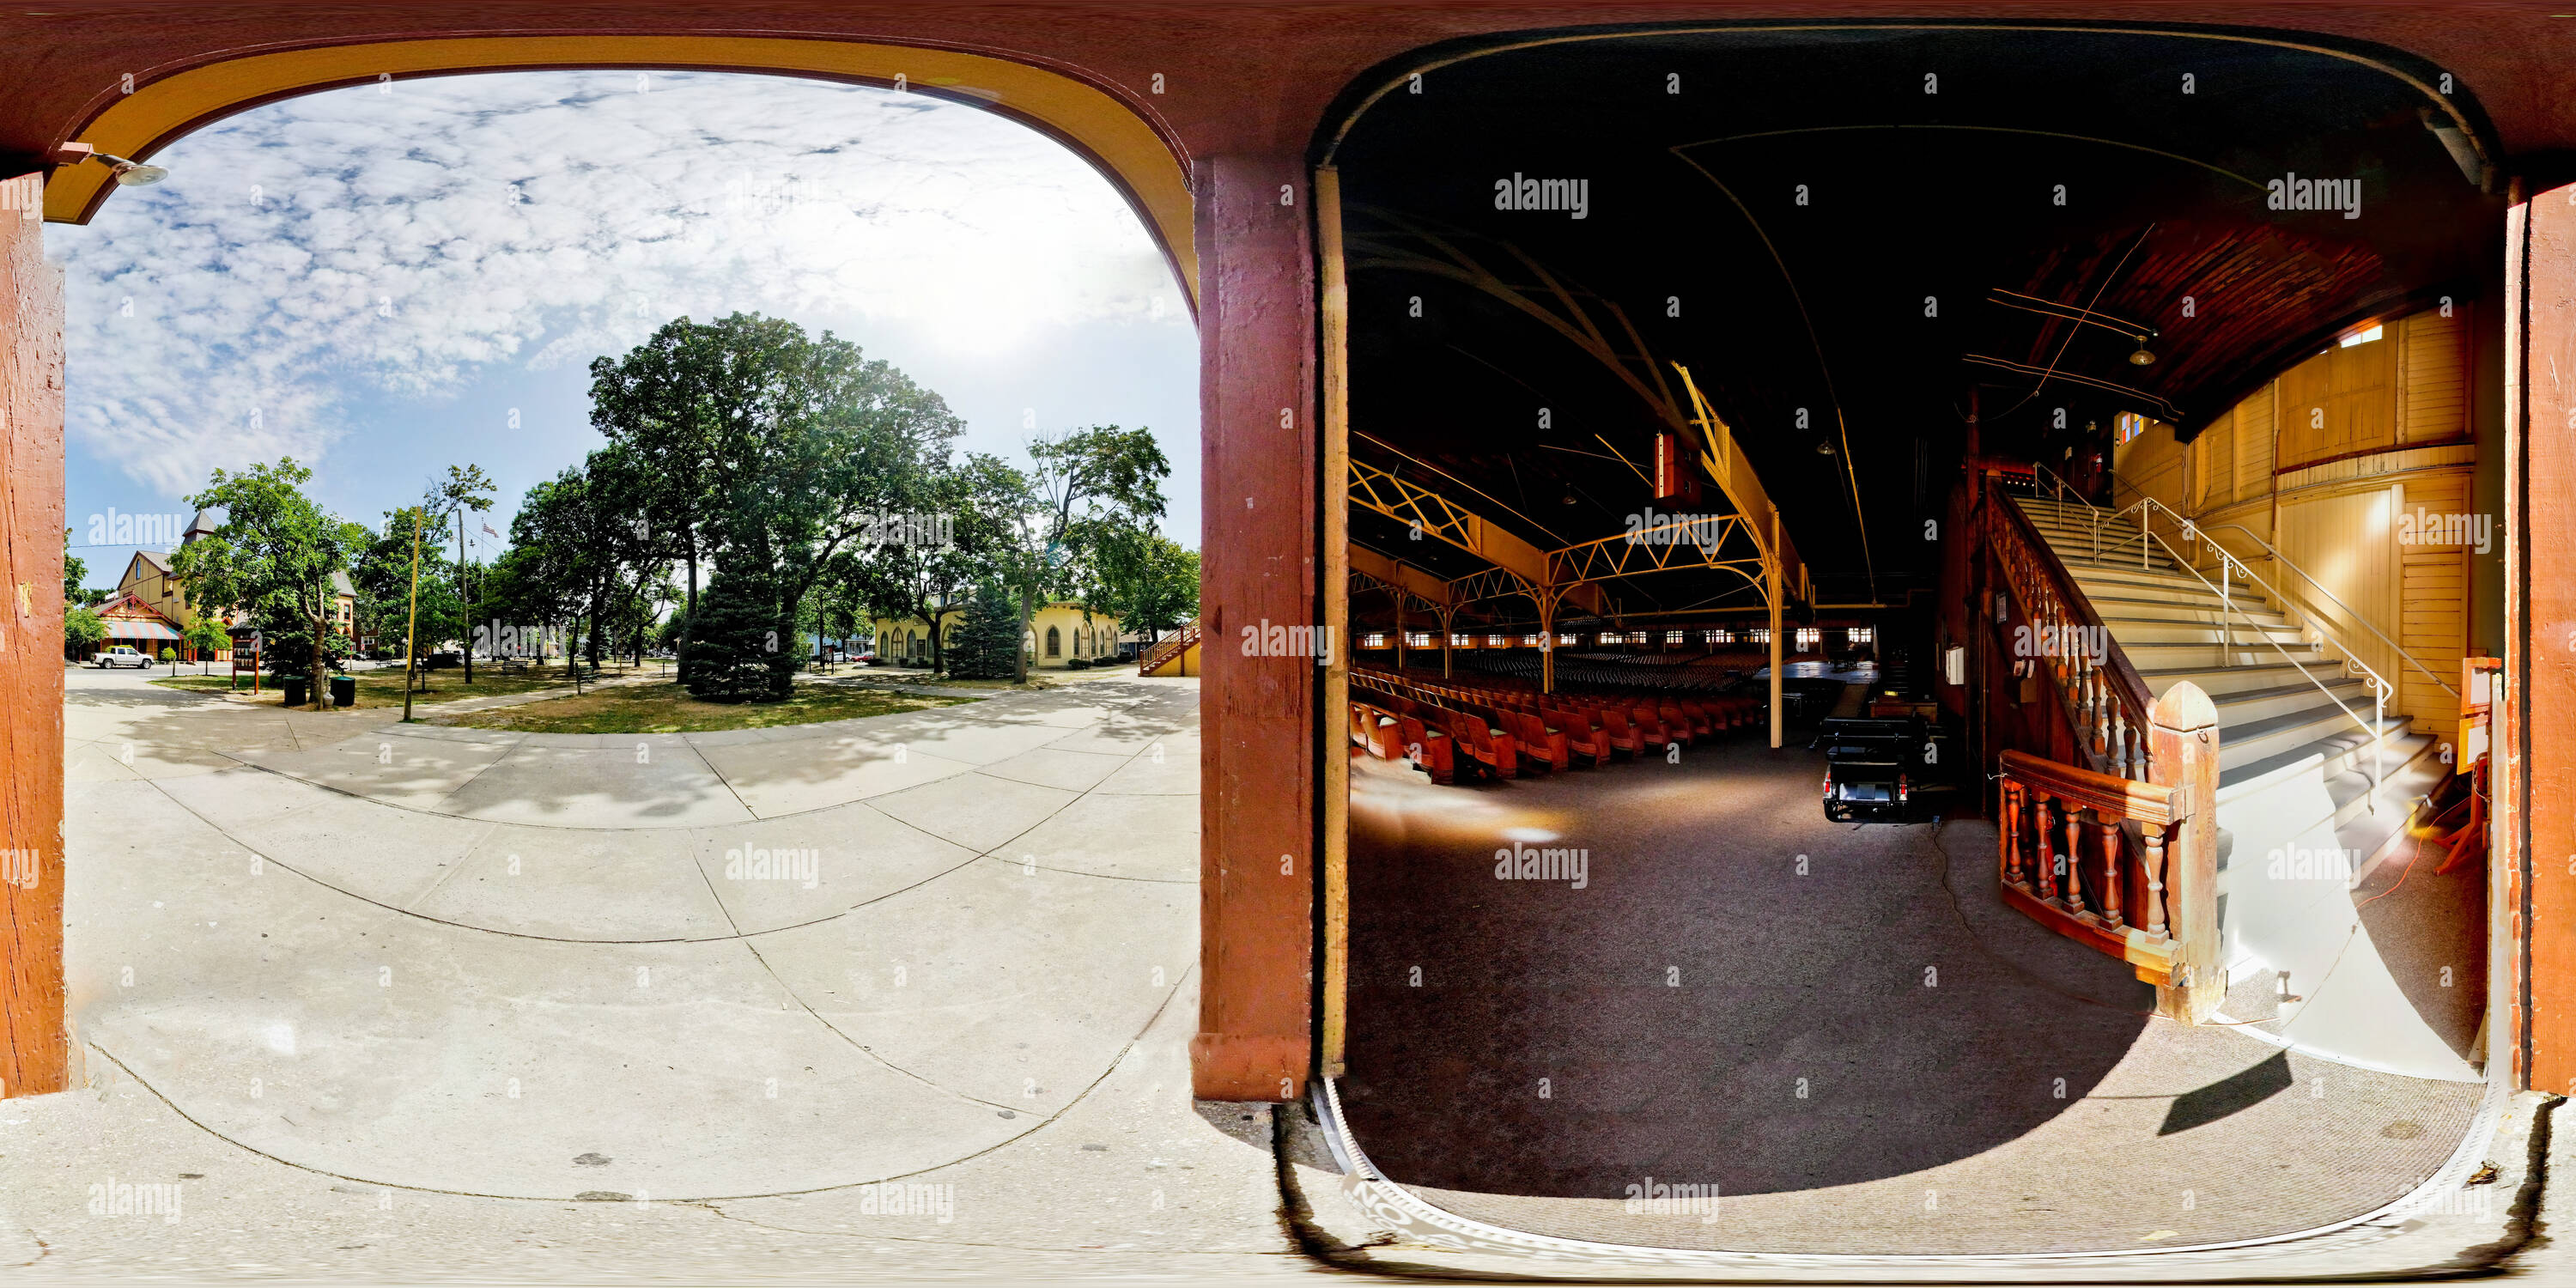 360° view of The Great Auditorium, Ocean Grove, New Jersey - Alamy